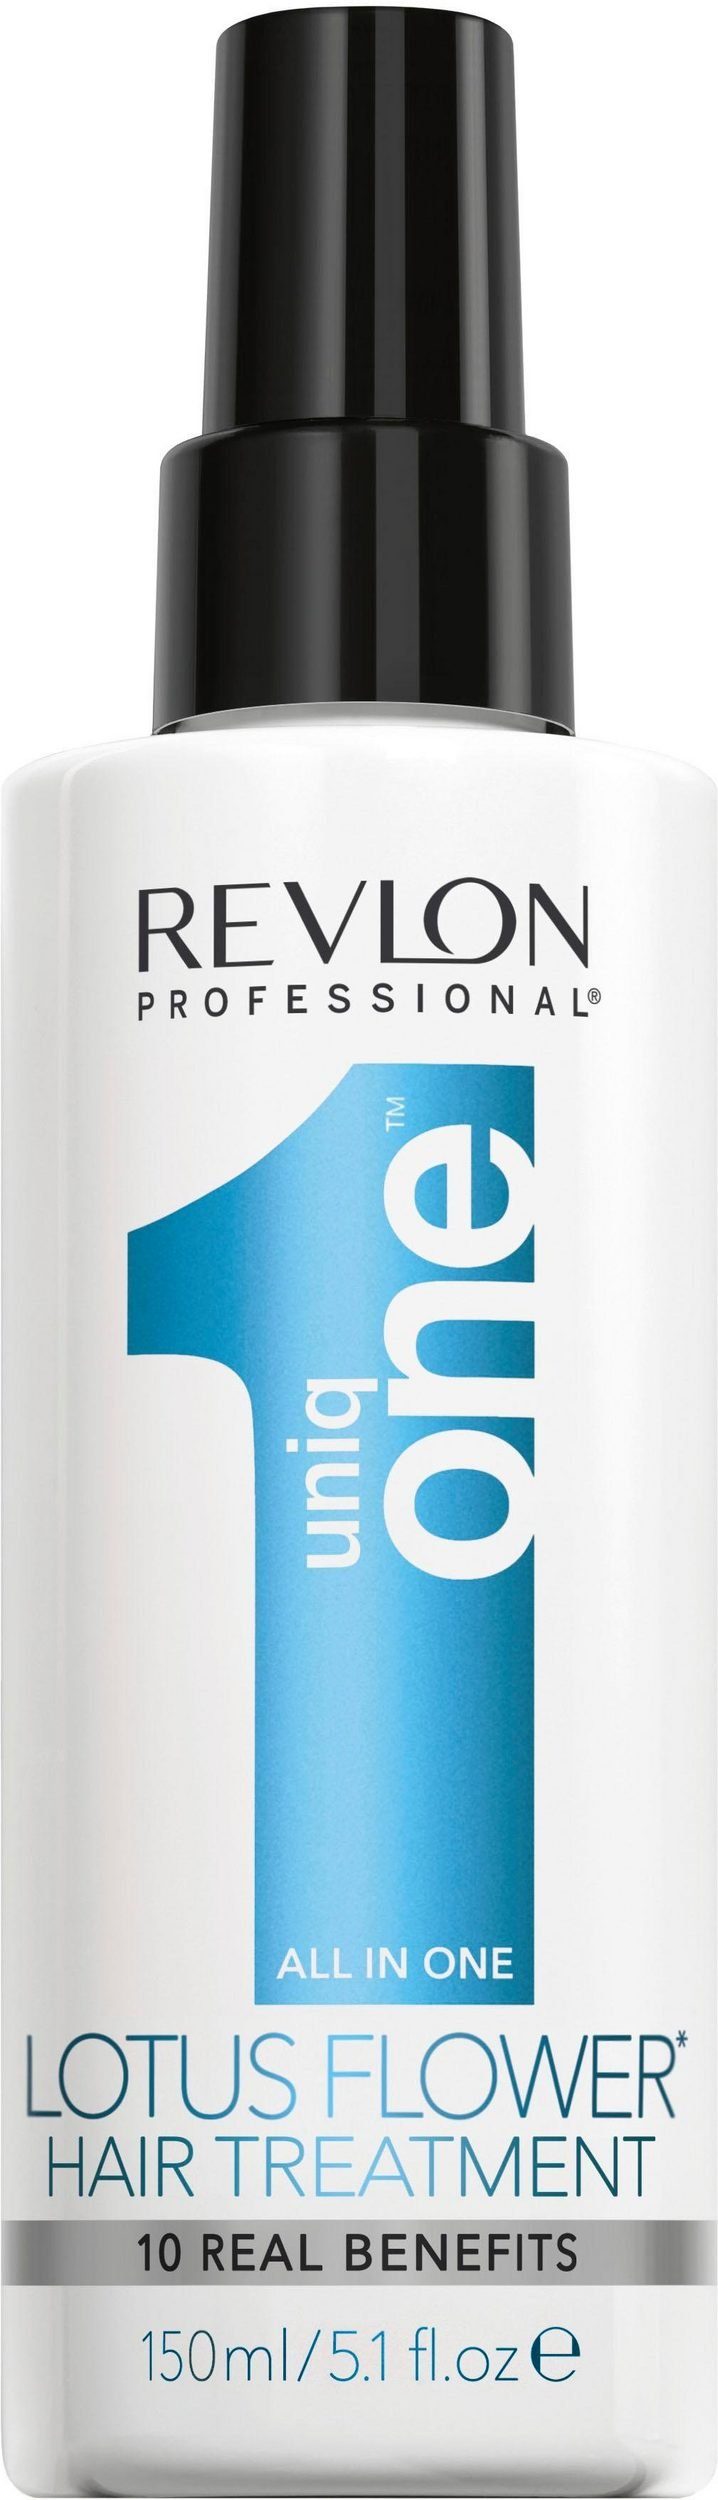 REVLON PROFESSIONAL Leave-in Pflege Uniq One All in one Lotus Flower Hair  Treatment